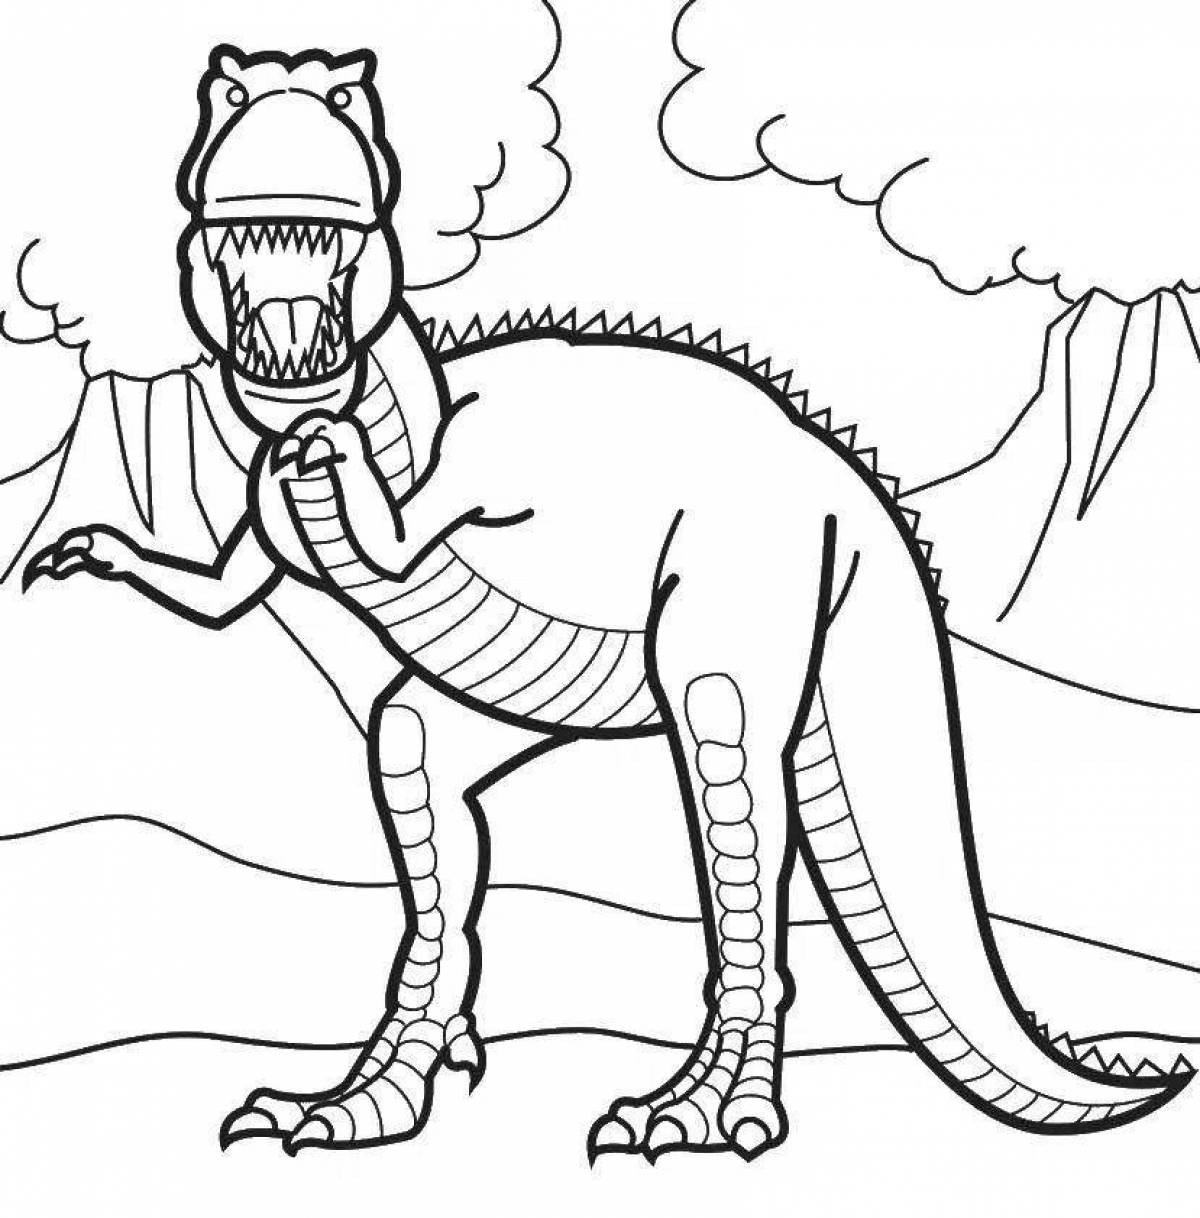 Outstanding dinosaur coloring page